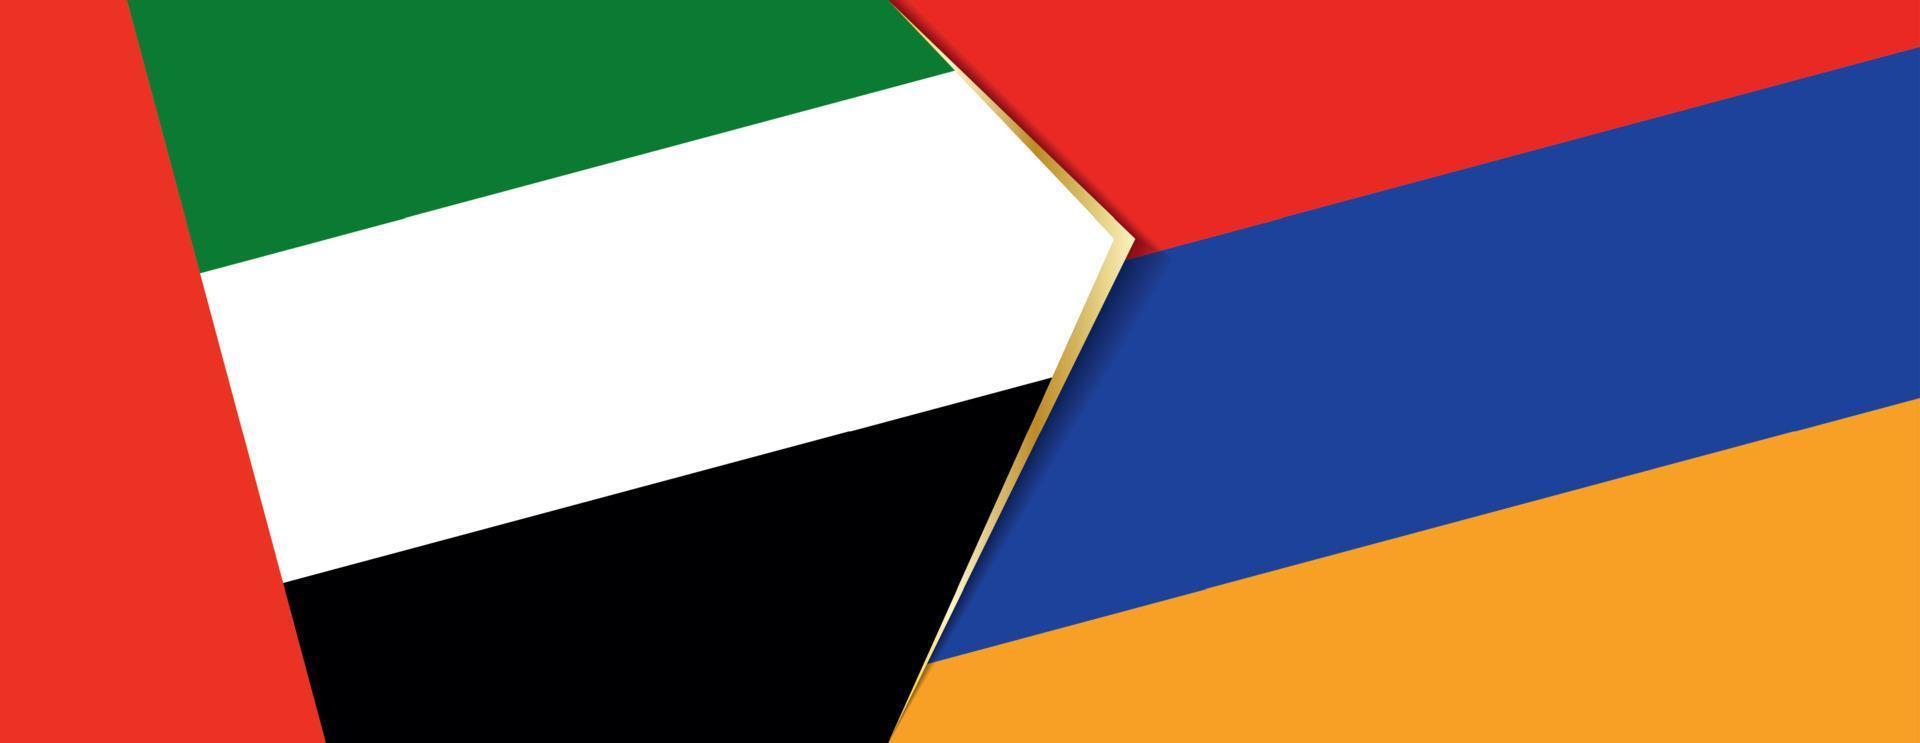 United Arab Emirates and Armenia flags, two vector flags.